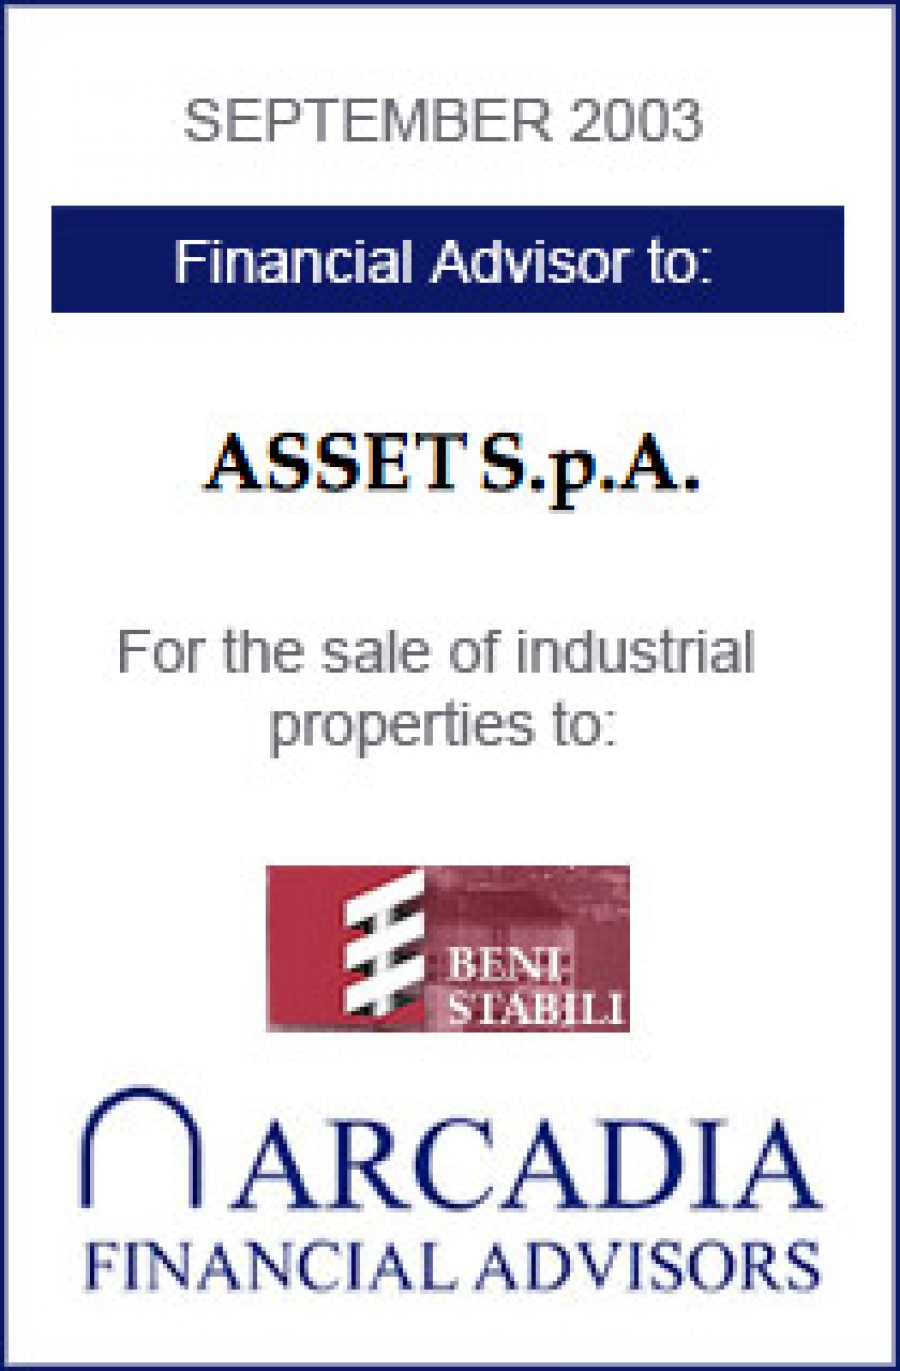 Transaction completed with Asset S.p.a.